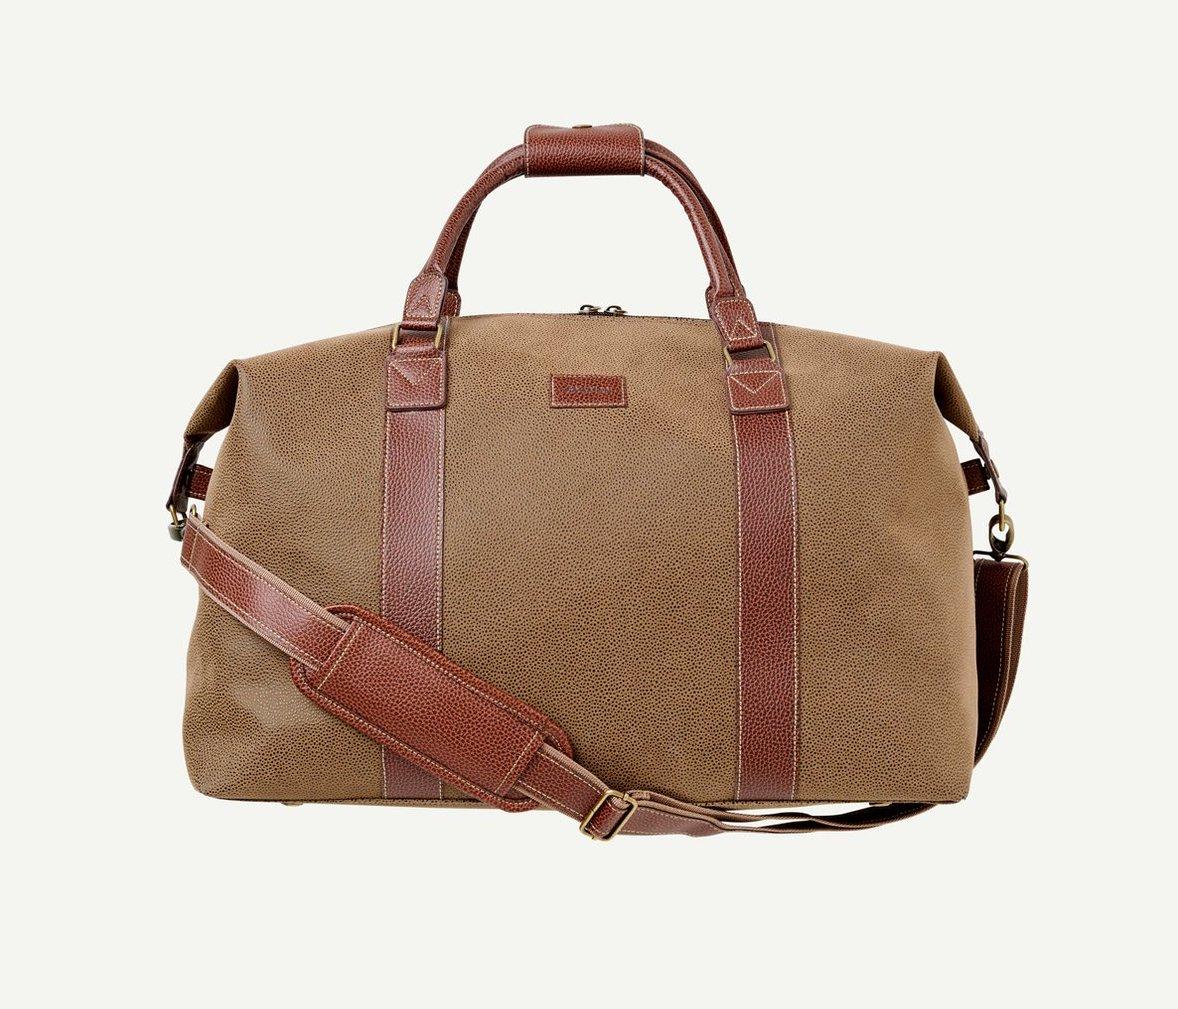 leather bag for groomsmen gifts